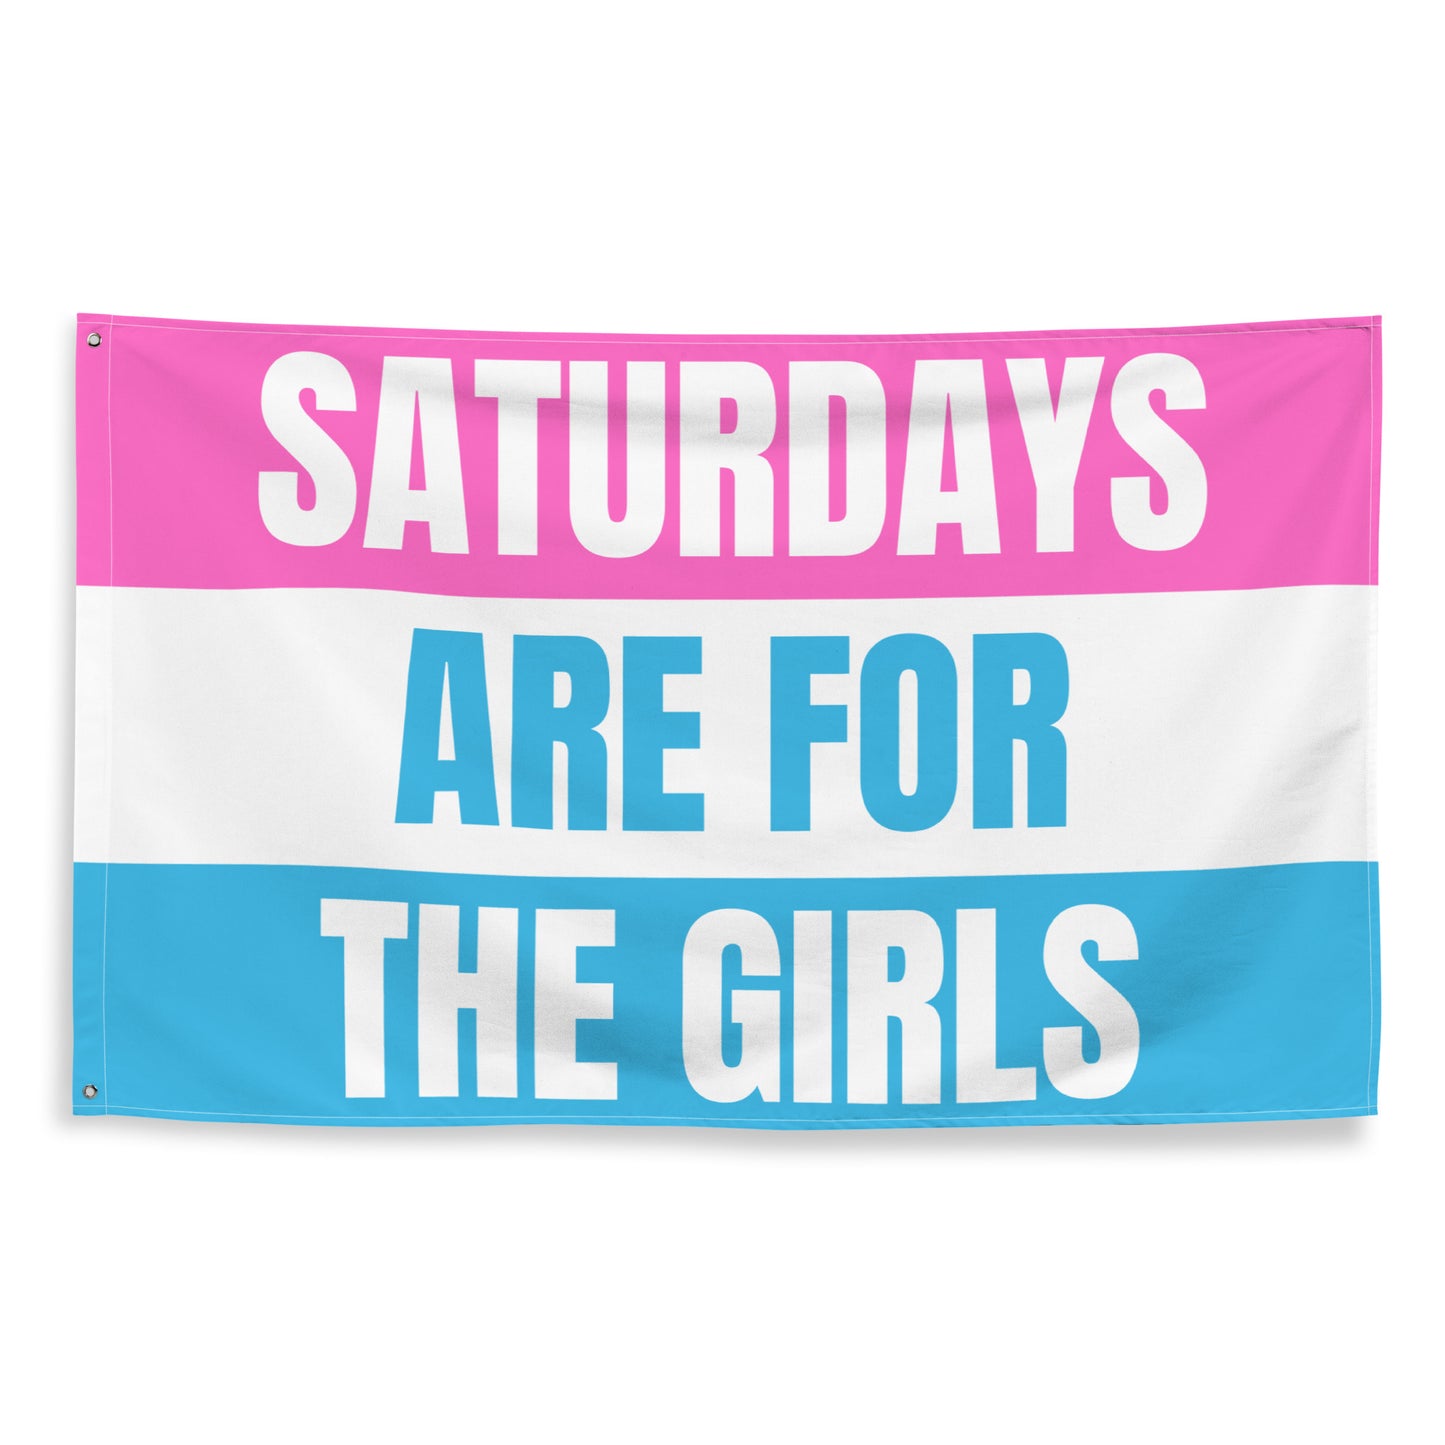 Saturdays are for the Girls, Pink and Blue, Funny Tapestry, College Funny Tapestry, Dorm Tapestry, Tapestry For Girls, Dorm, Apartment Decor